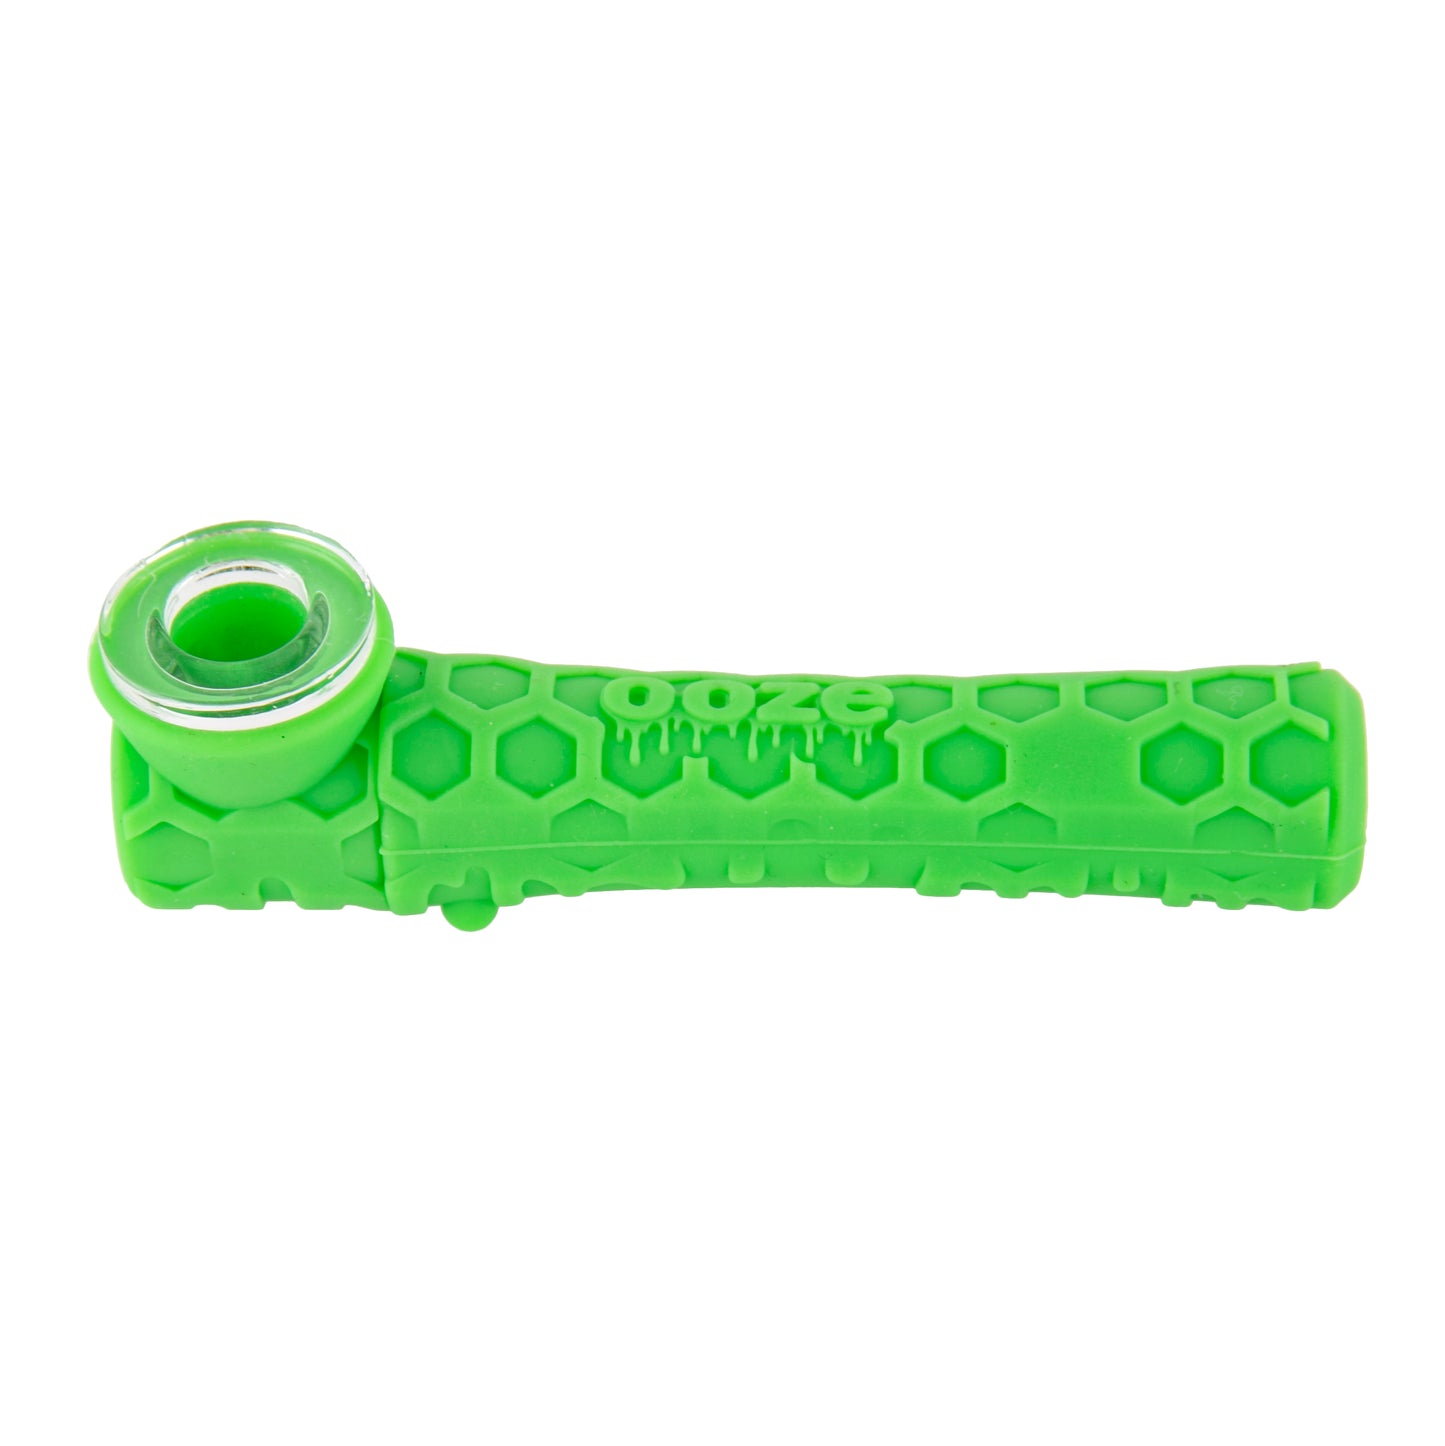 Ooze Piper Silicone Glass Hand Pipe & Chillum - Slime Green